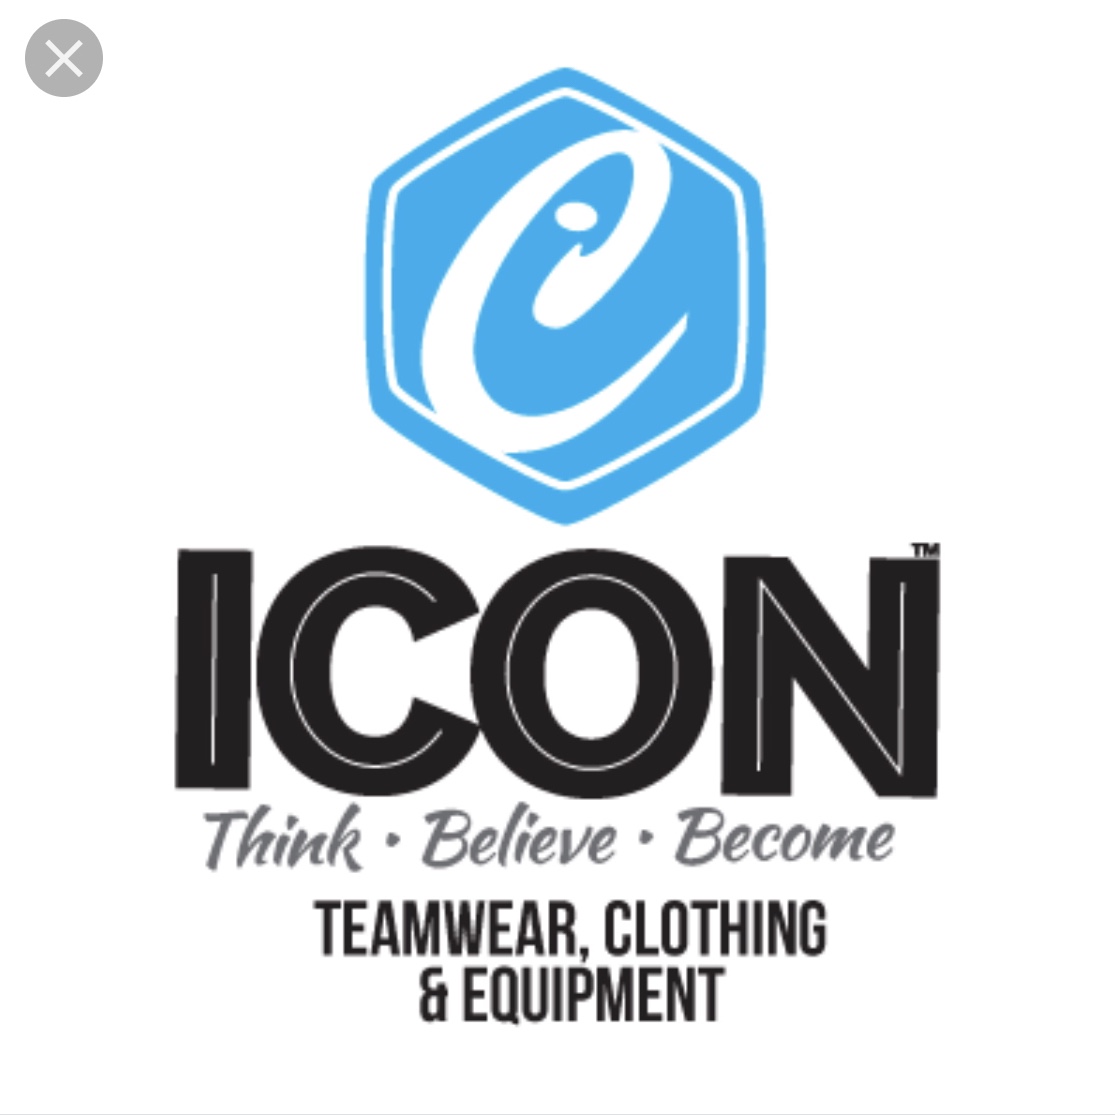 ICON Cricket Wear free delivery for orders made before 8th November